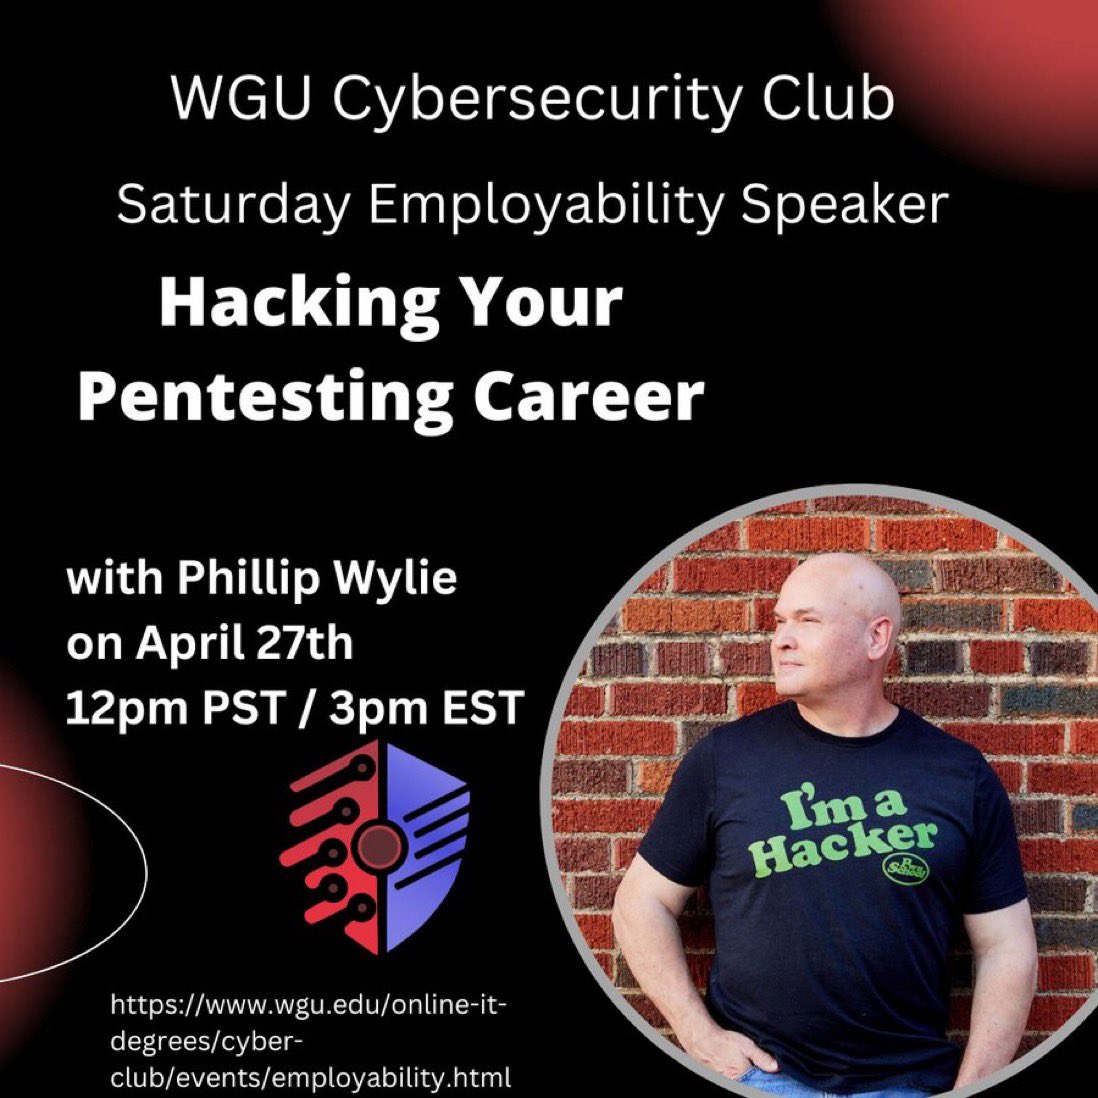 Hacking Your Pentesting Career with @PhillipWylie Tomorrow at 3pm ET You don’t want to miss this! RSVP 👉 wgu.joinhandshake.com/stu/events/152… #Cybersecurity #WGUCC #Pentesting